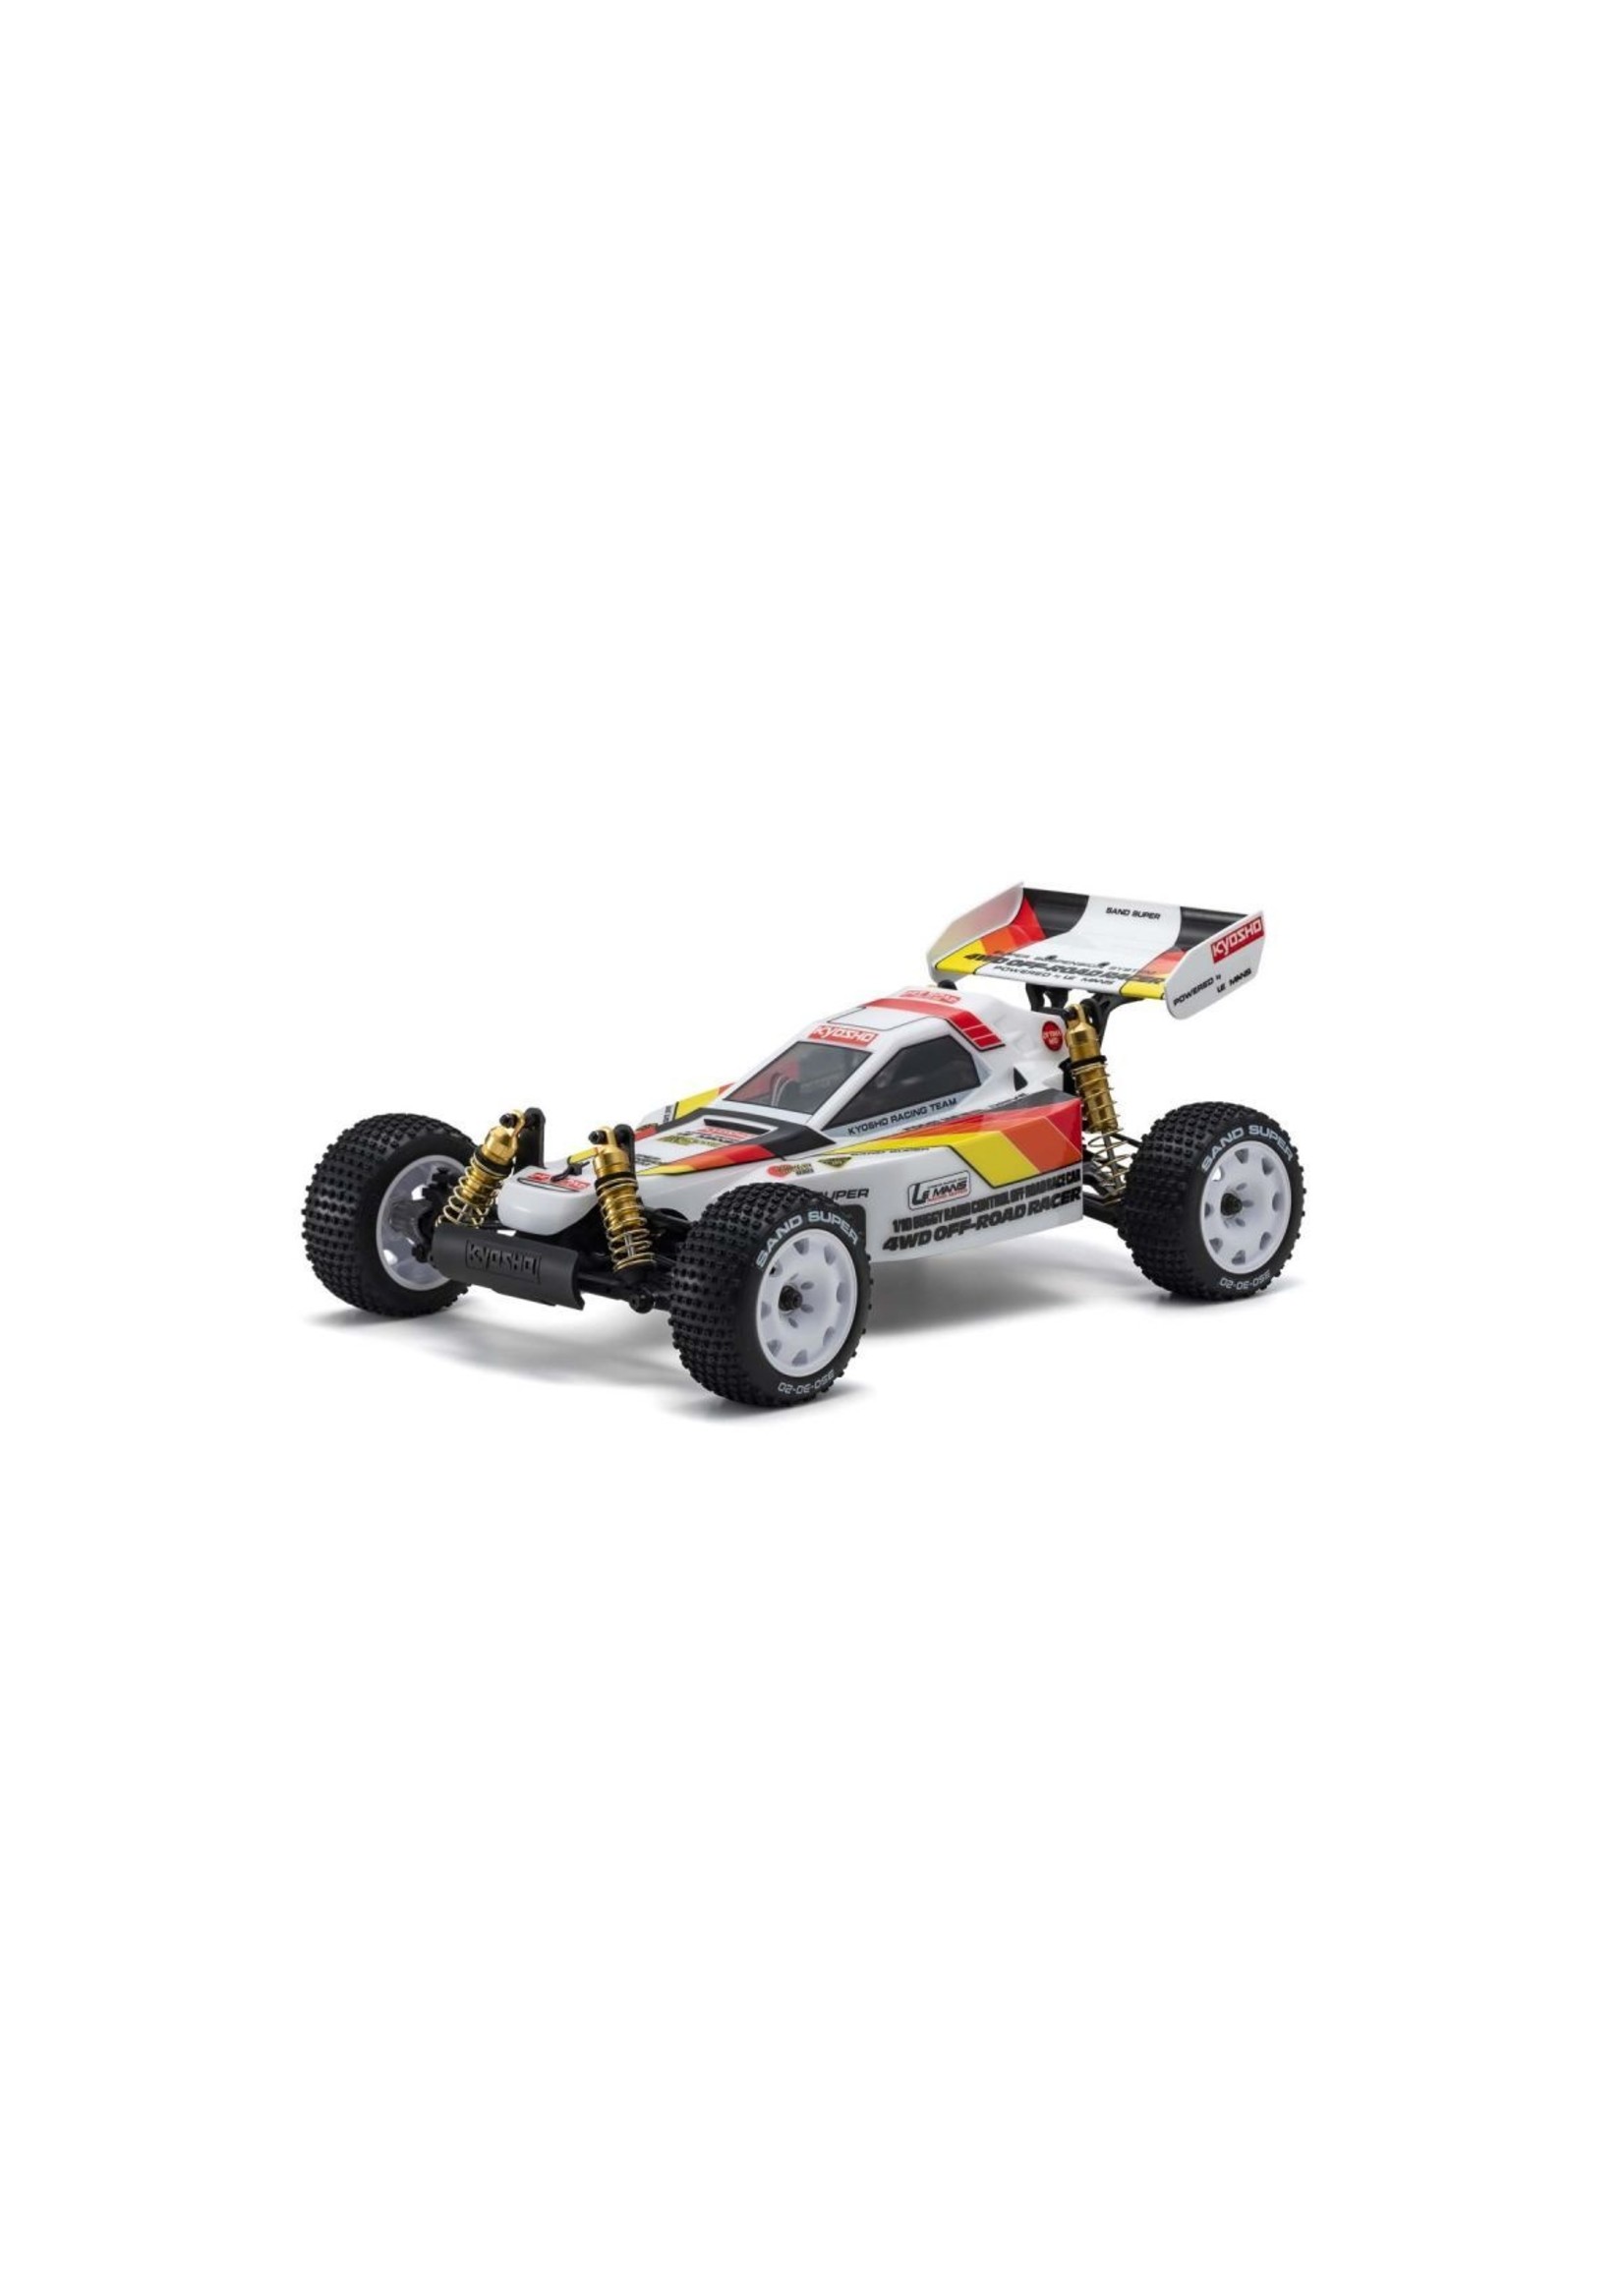 Kyosho 30622 - Optima Mid 4wd Buggy Kit With Turbo Optima Mid Decals And Wing